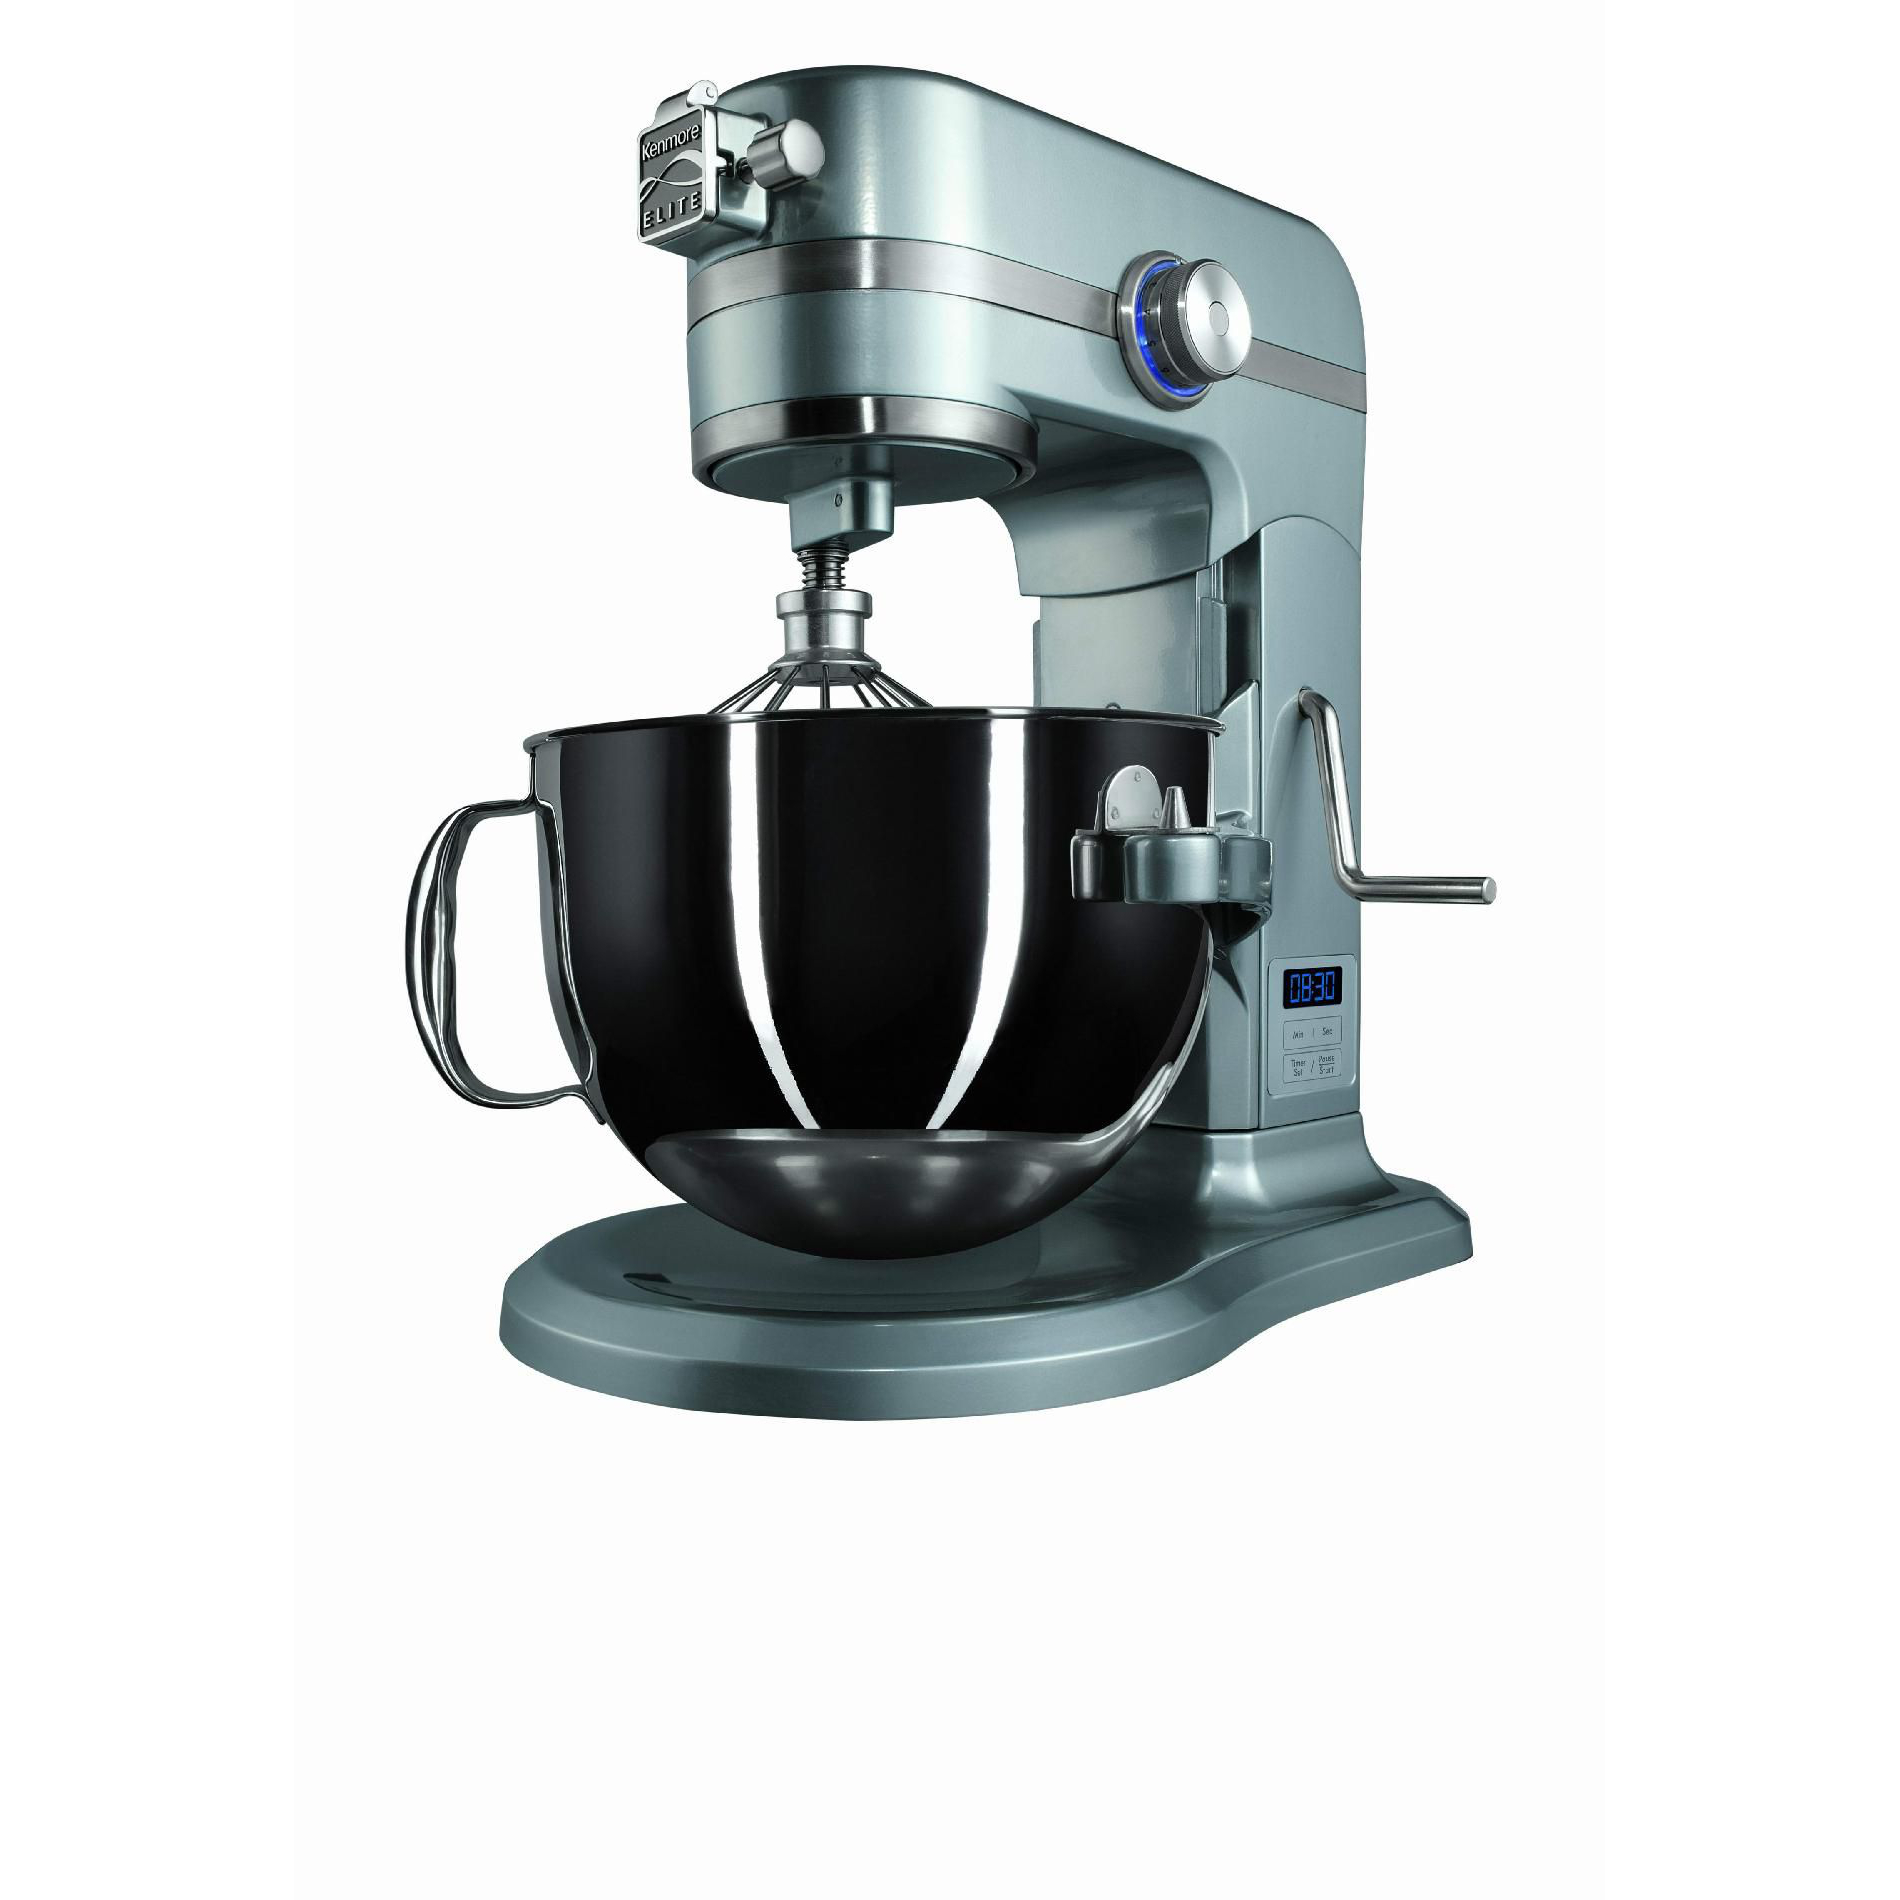 Official Kenmore elite stand mixer parts